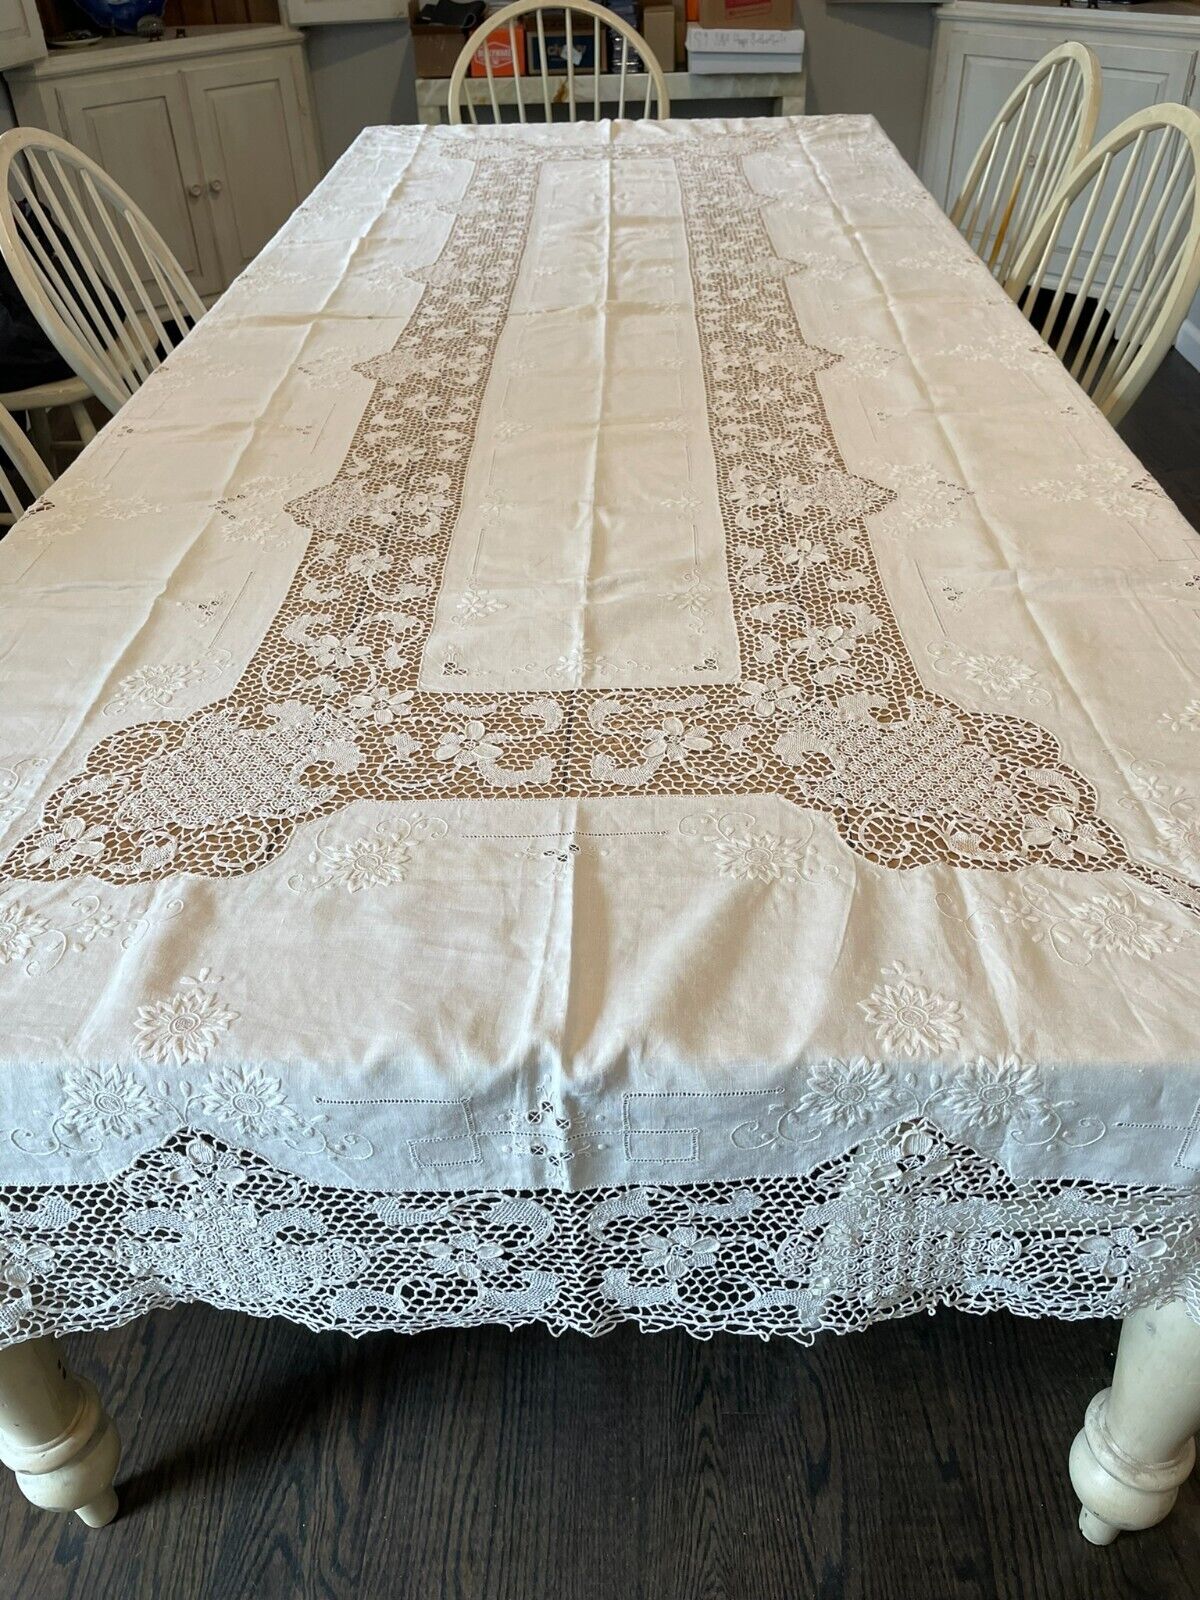 Vintage Italian Linen & Lace Tablecloth, 128x62, with 12 napkins